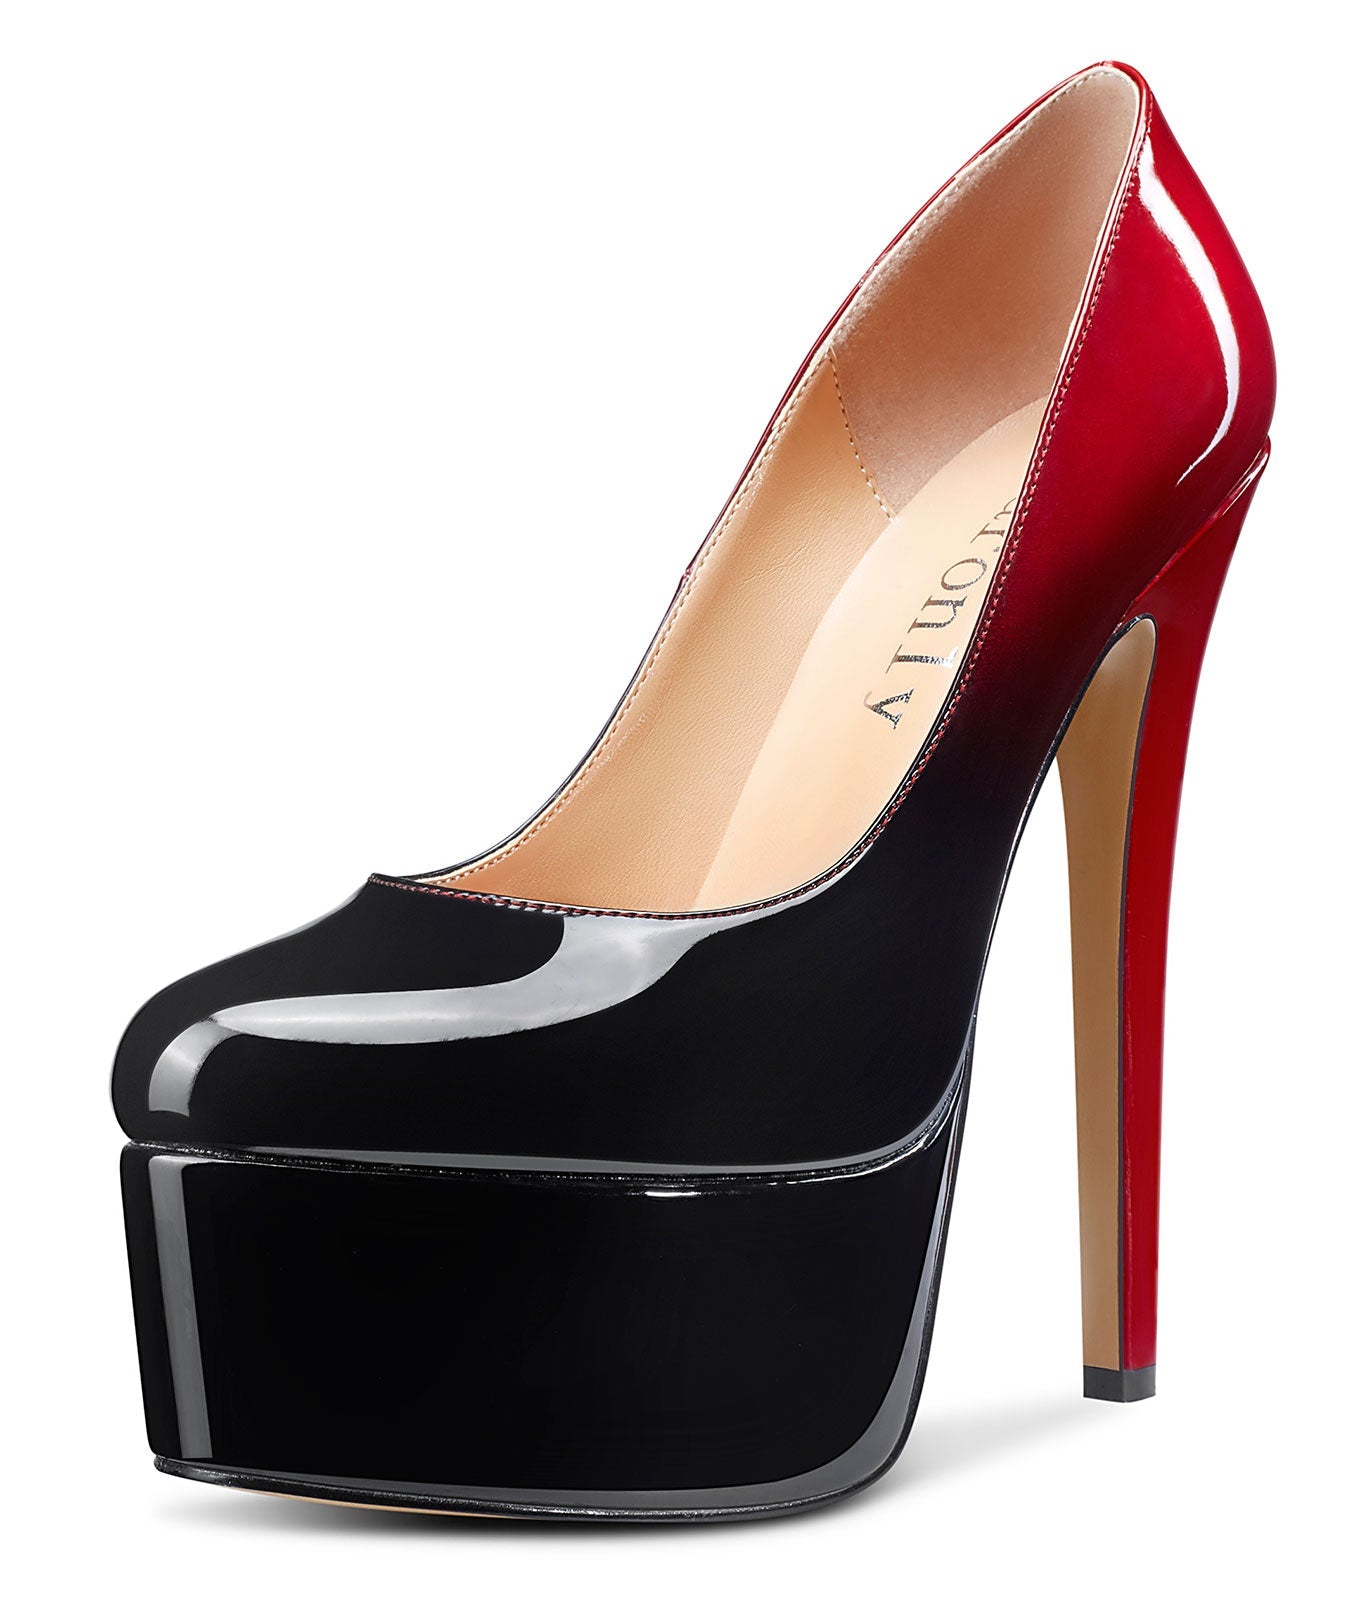 DearOnly Women's High Heels Platform Pumps Slip On Sexy Round Toe Stilettos  5.9 Inches Inch Heel Classic Dress Party Shoes - US5 / Black-red Patent